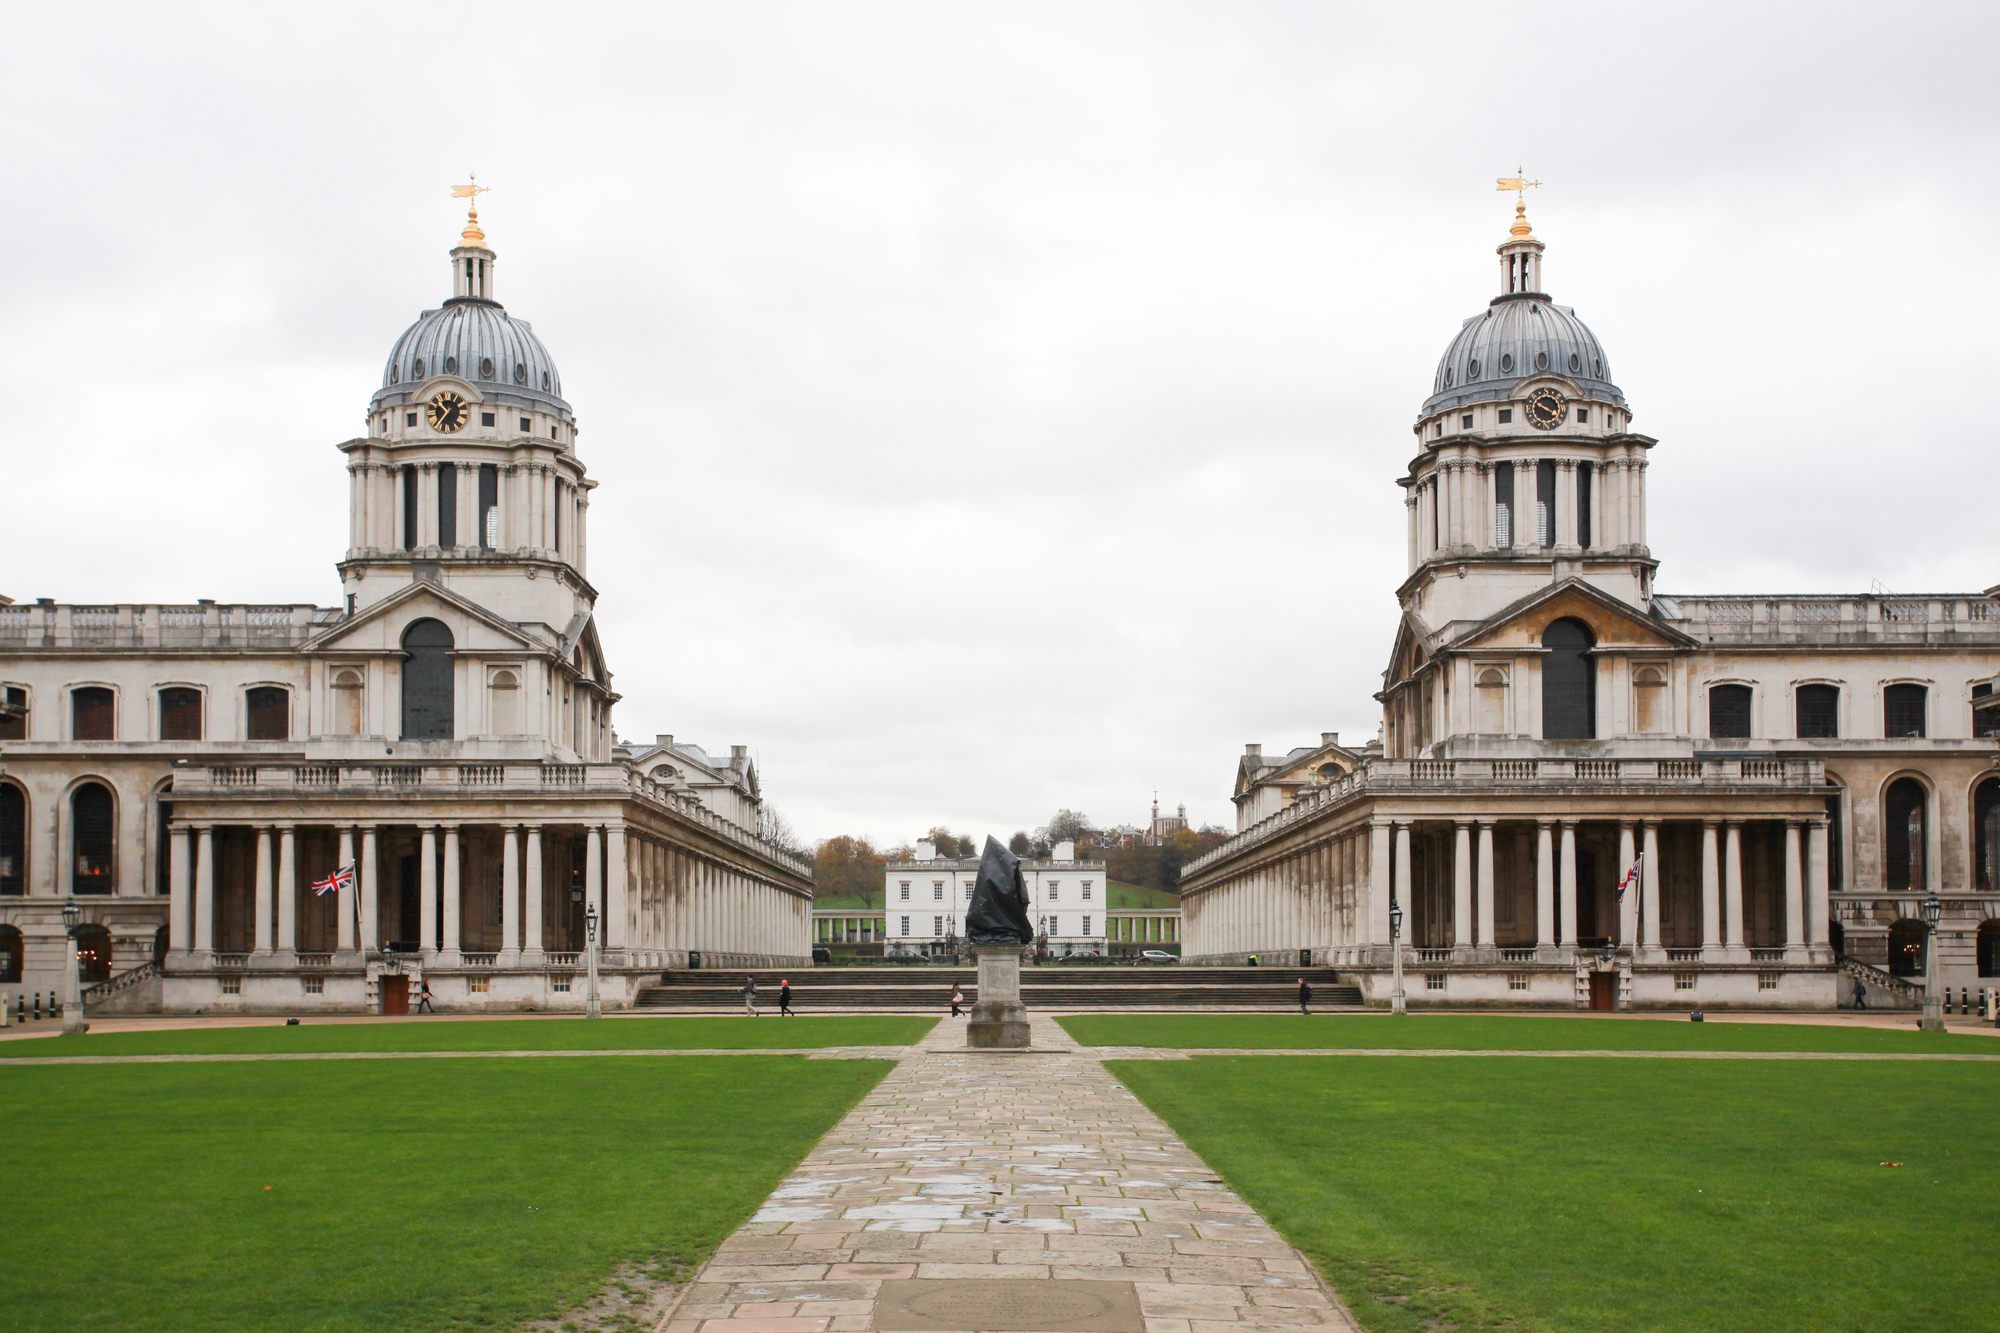 University of Greenwich regarding the data breach group action 